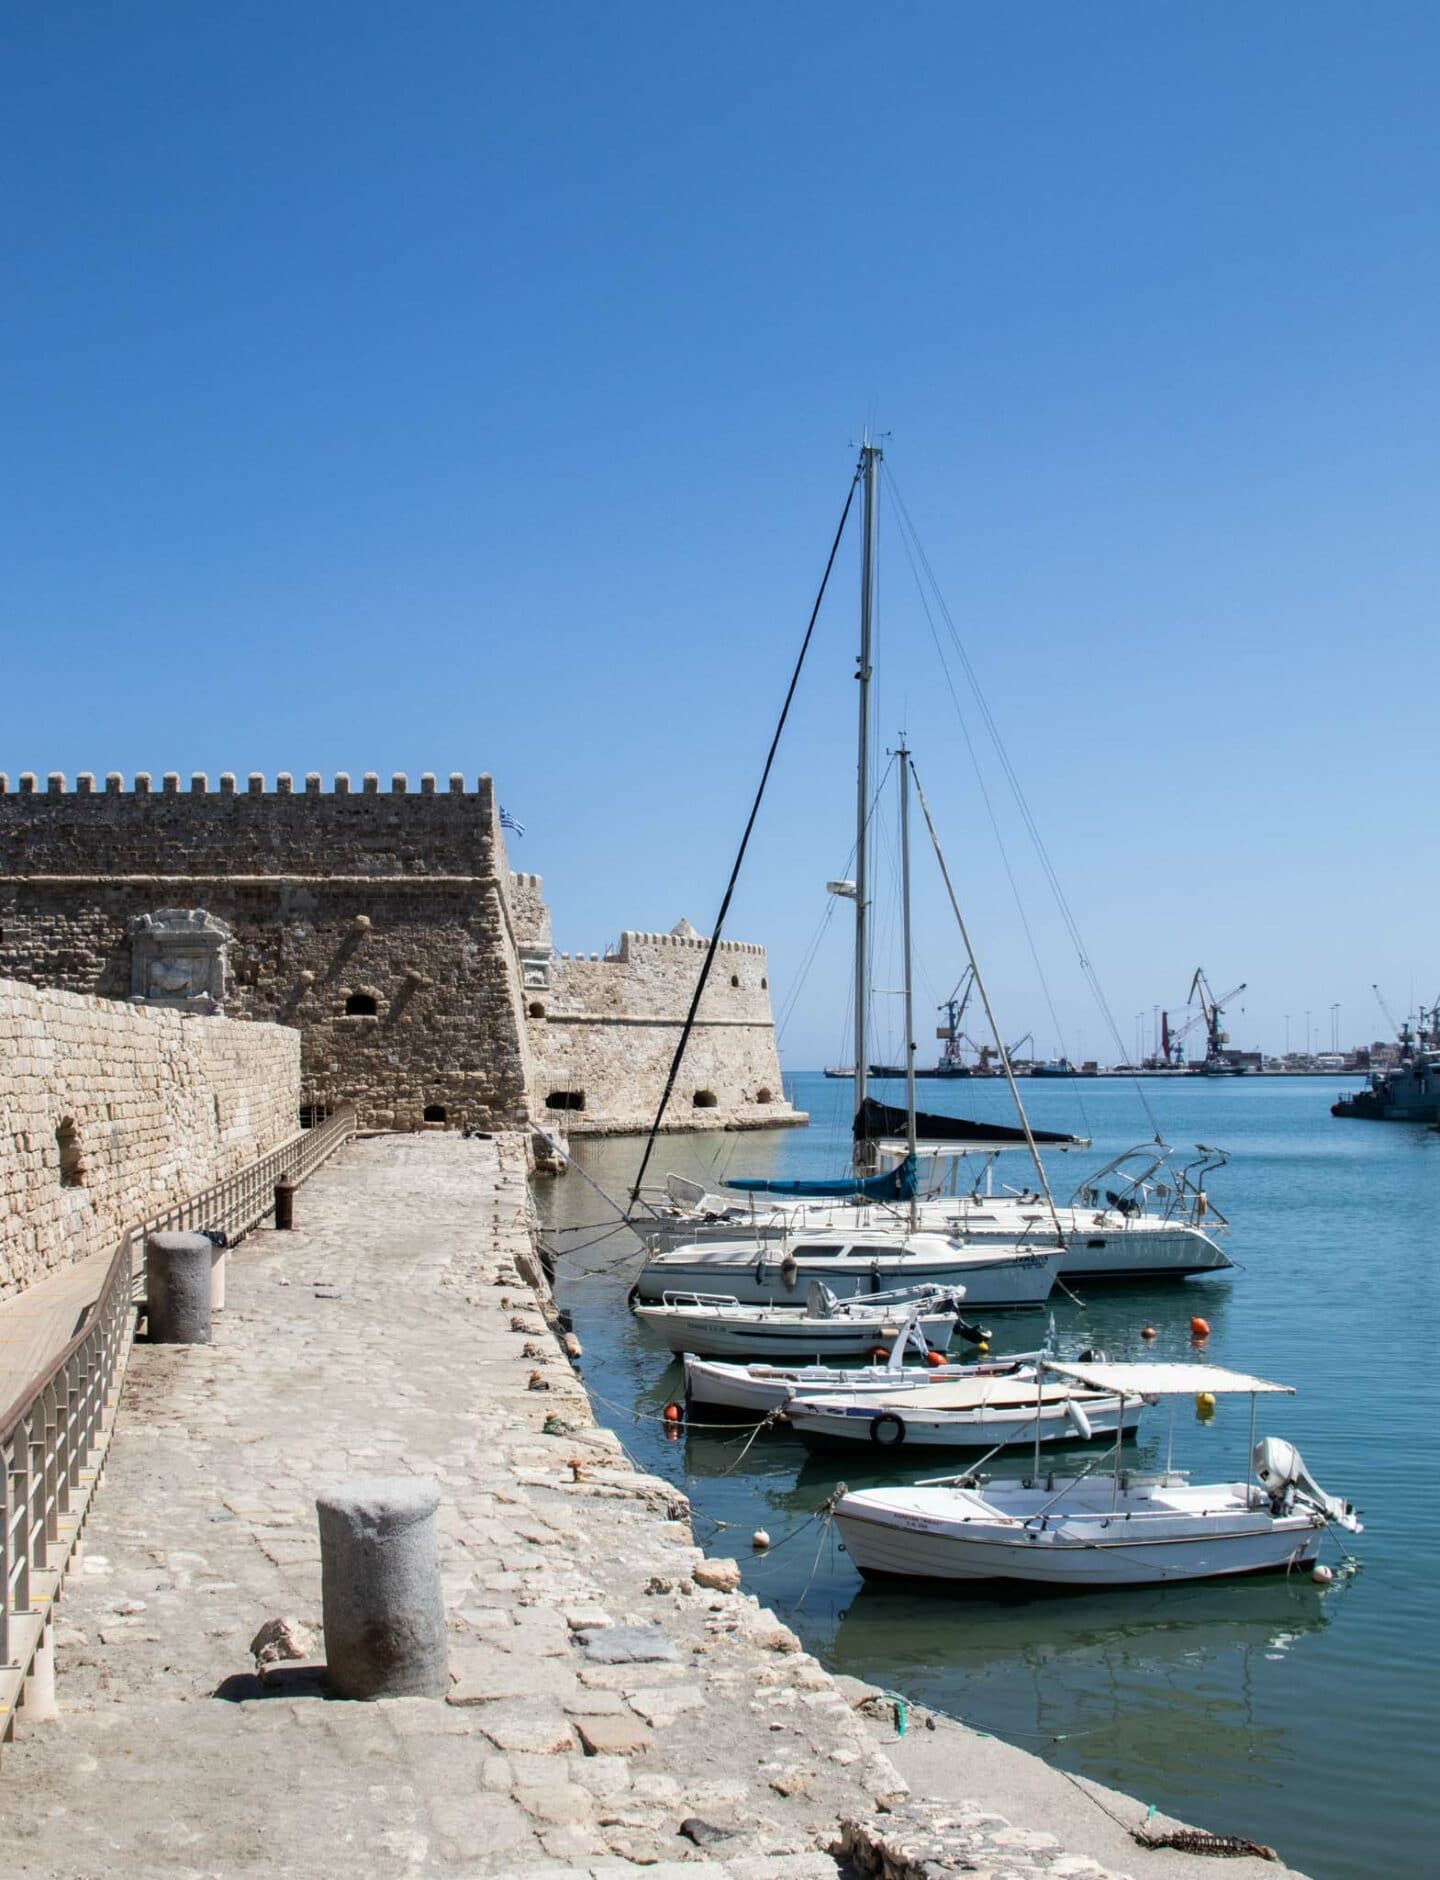 The Koules fortress guards Heraklion from sea attack. It's a fortification on a short pier. There are yachts and fishing boats inside the harbour created by the fortifications. 